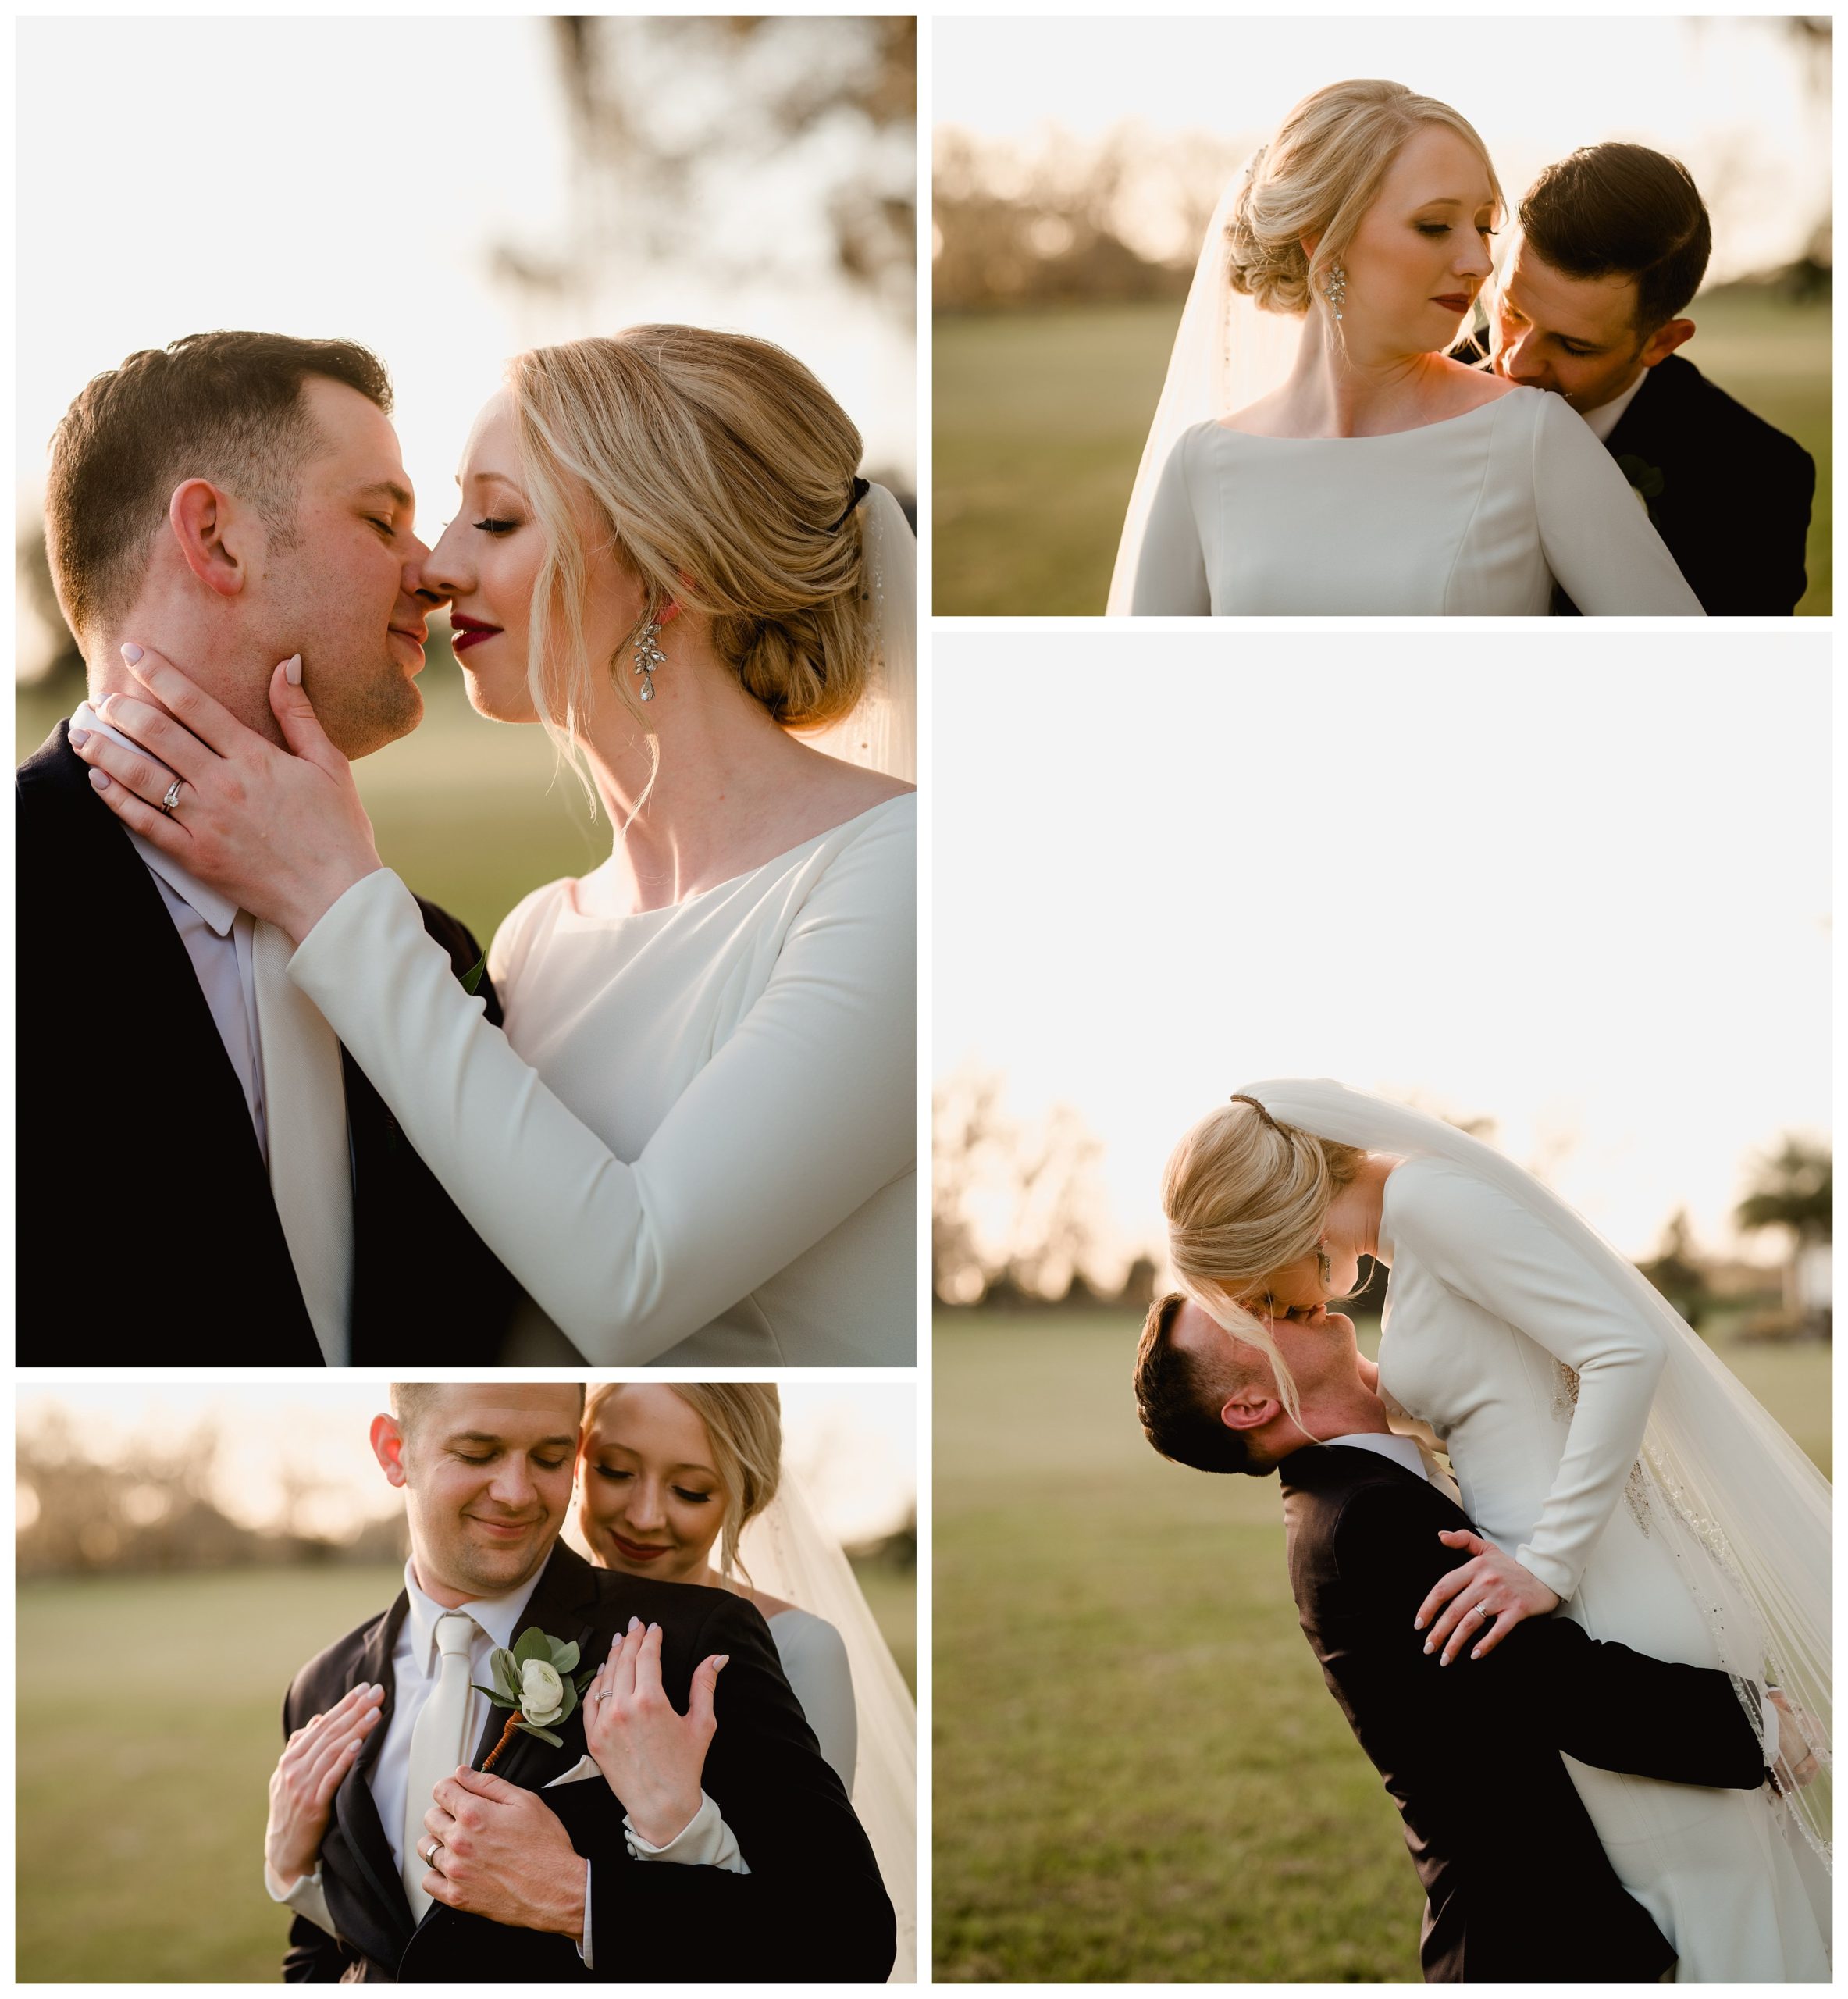 Intimate poses for wedding couple during the golden hour - Shelly Williams Photography